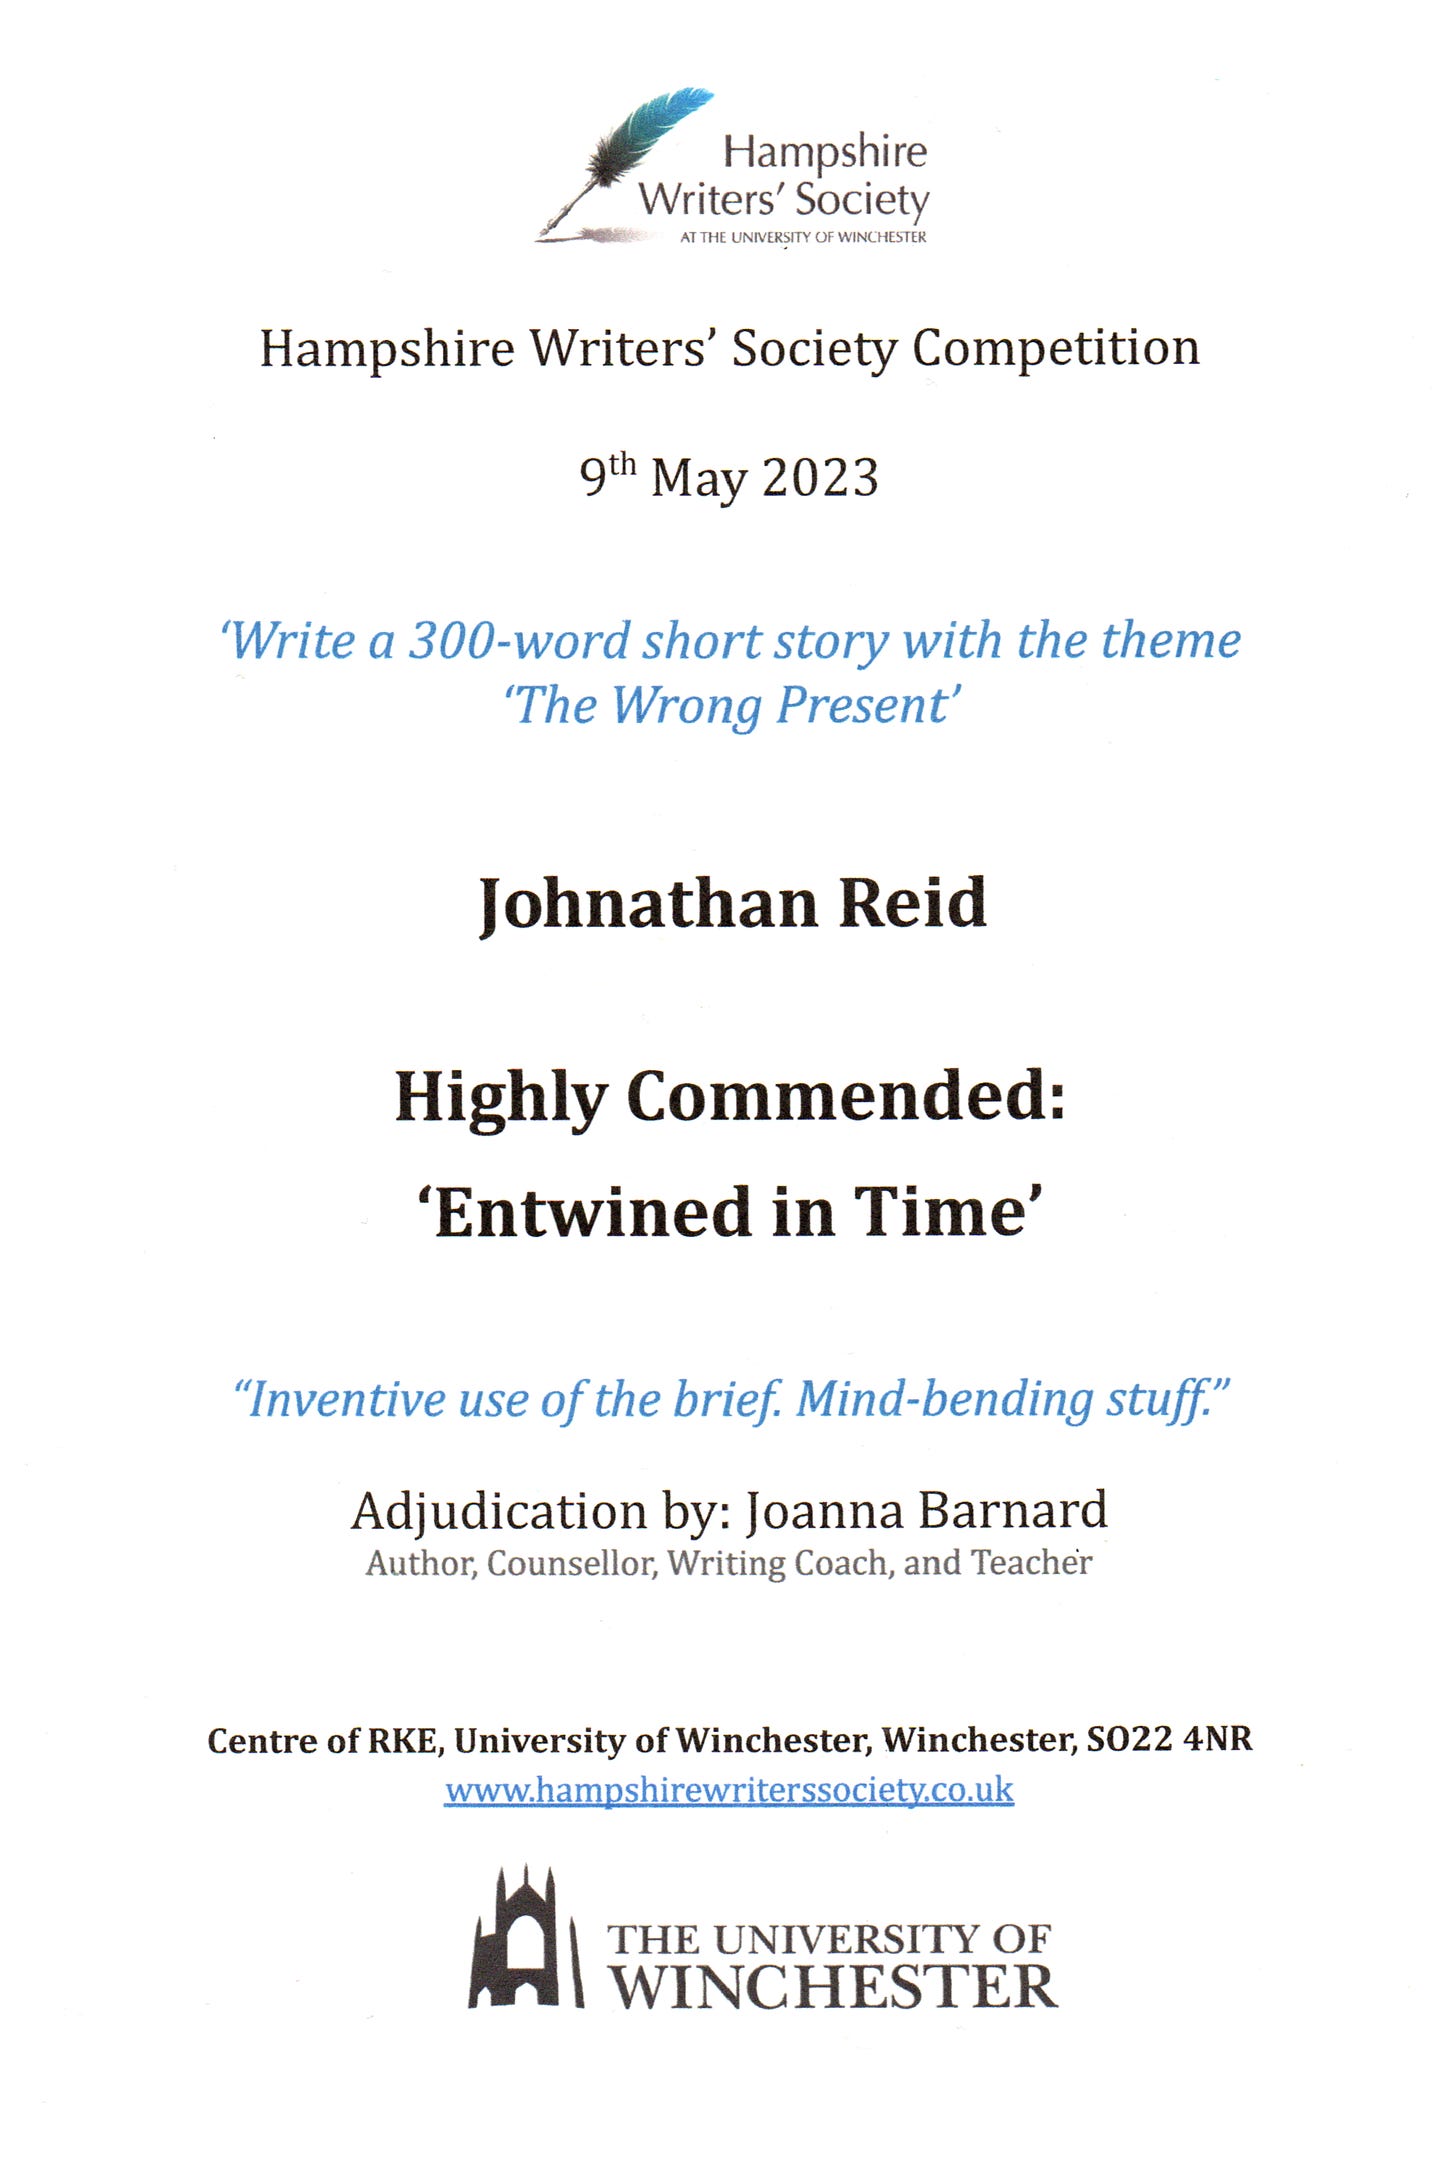 Hampshire Writers’ Society Writing competition certificate, dated 9" May 2023. Awarded to Johnathan Reid in the Highly Commended category for ‘Entwined in Time’, a 300-word short story on the theme of ‘The Wrong Present’. Judged as “Inventive use of the brief. Mind-bending stuff” by Joanna Barnard (Author, Counsellor, Writing Coach, and Teacher).